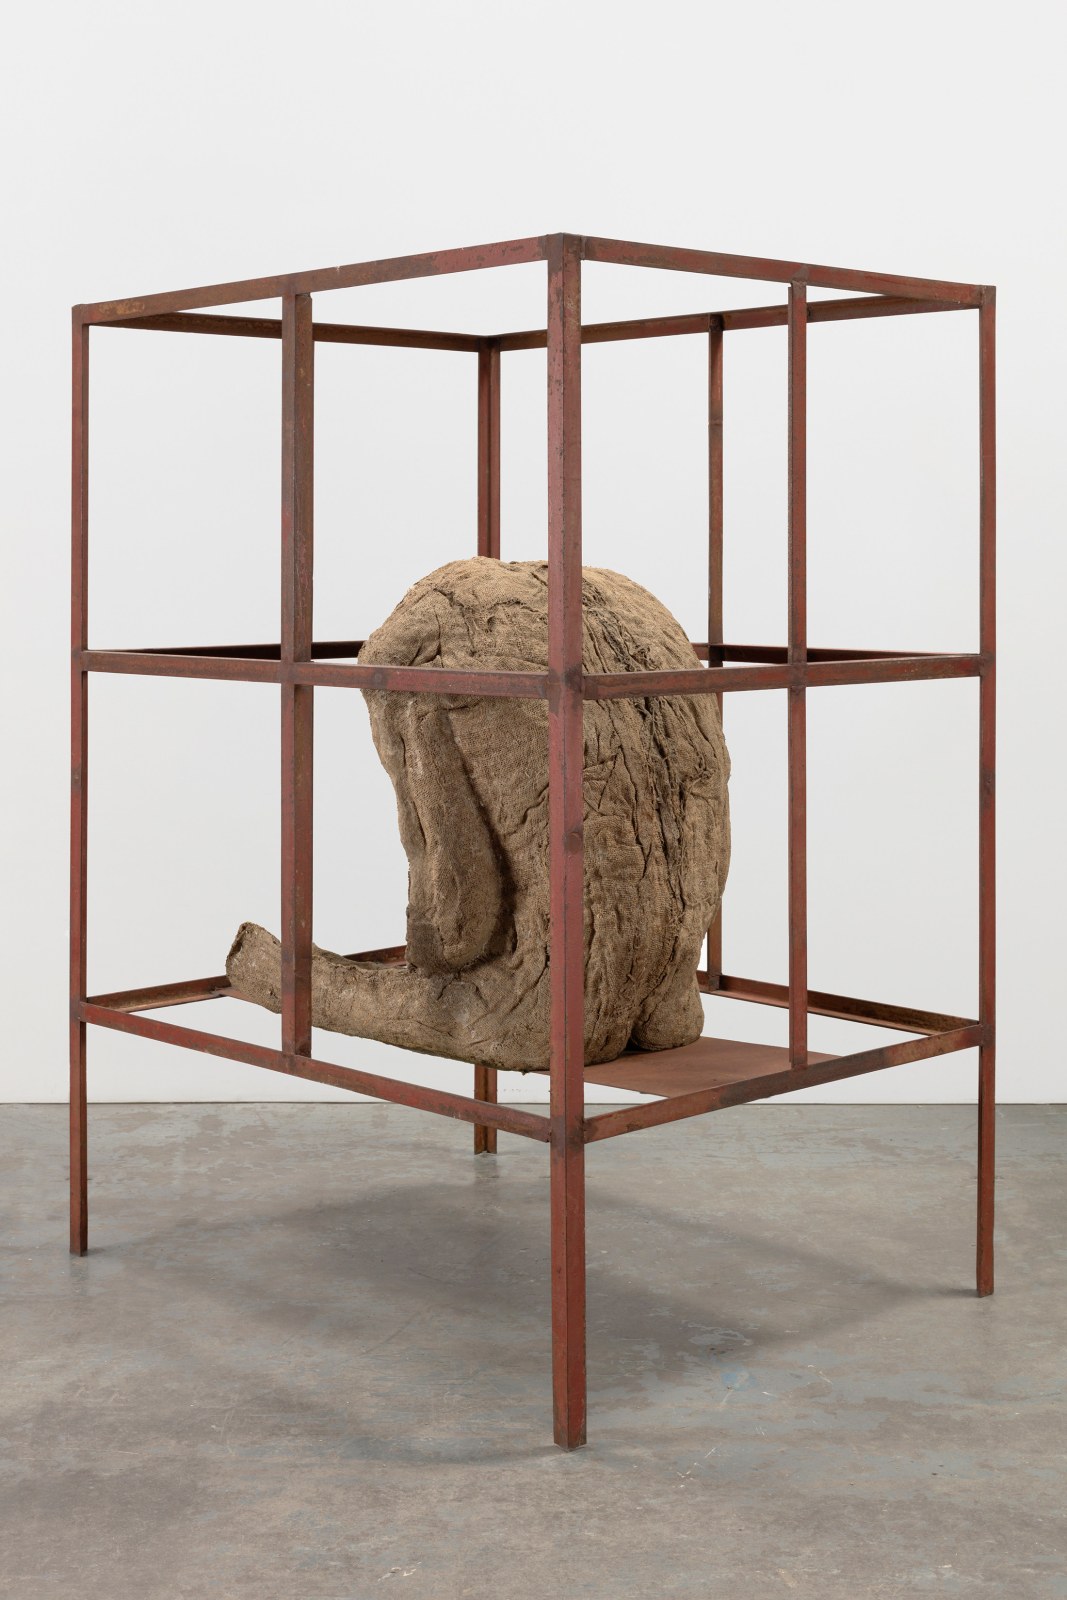 Sculpture of a life-size seated burlap and resin figure in an iron cage by Magdalena Abakanowicz